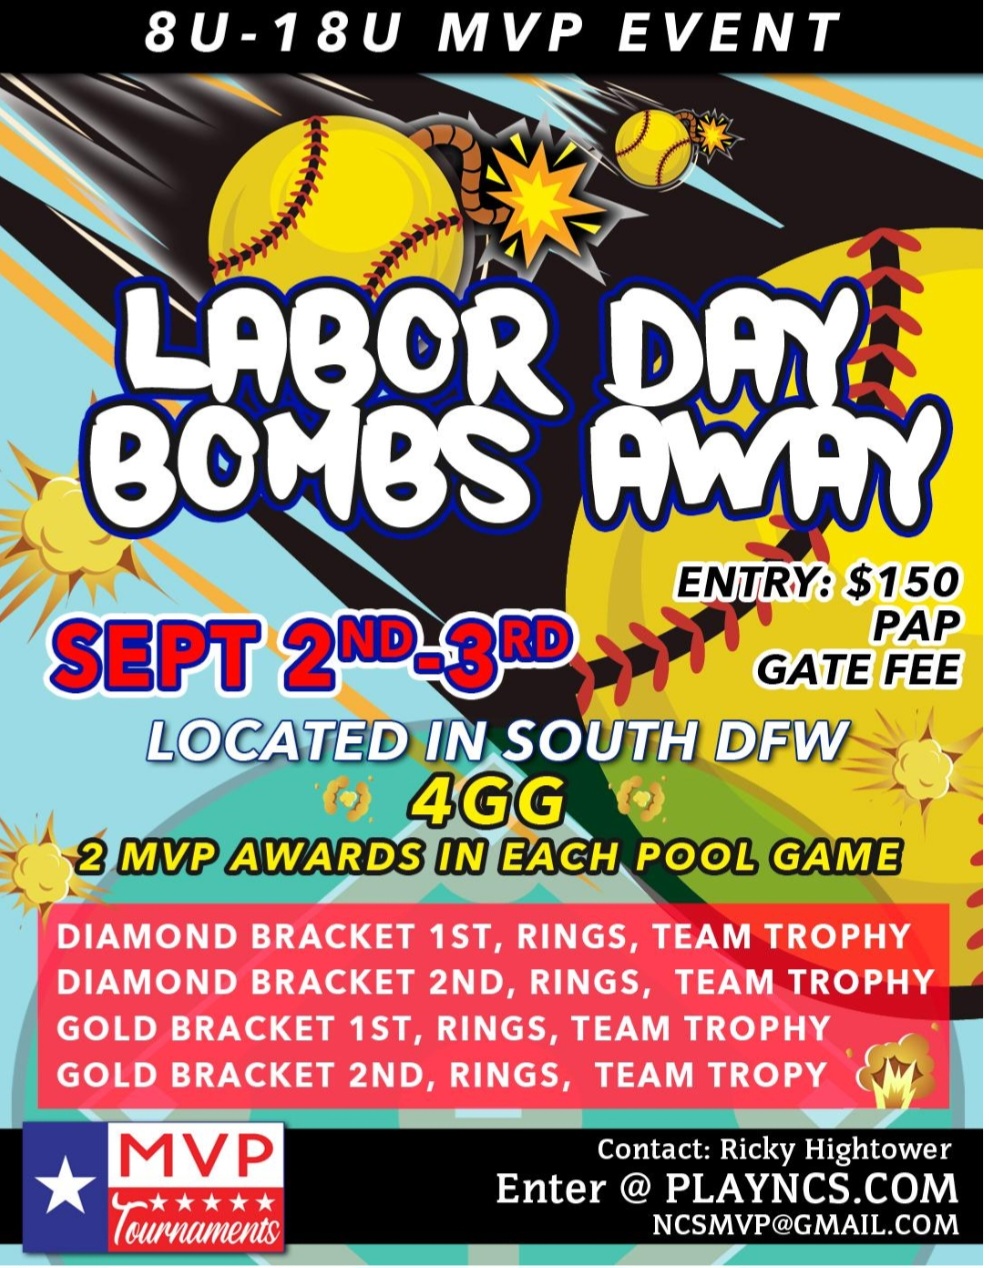 NCS 3RD ANNUAL LABOR DAY BOMBS AWAY MVP EVENT Logo